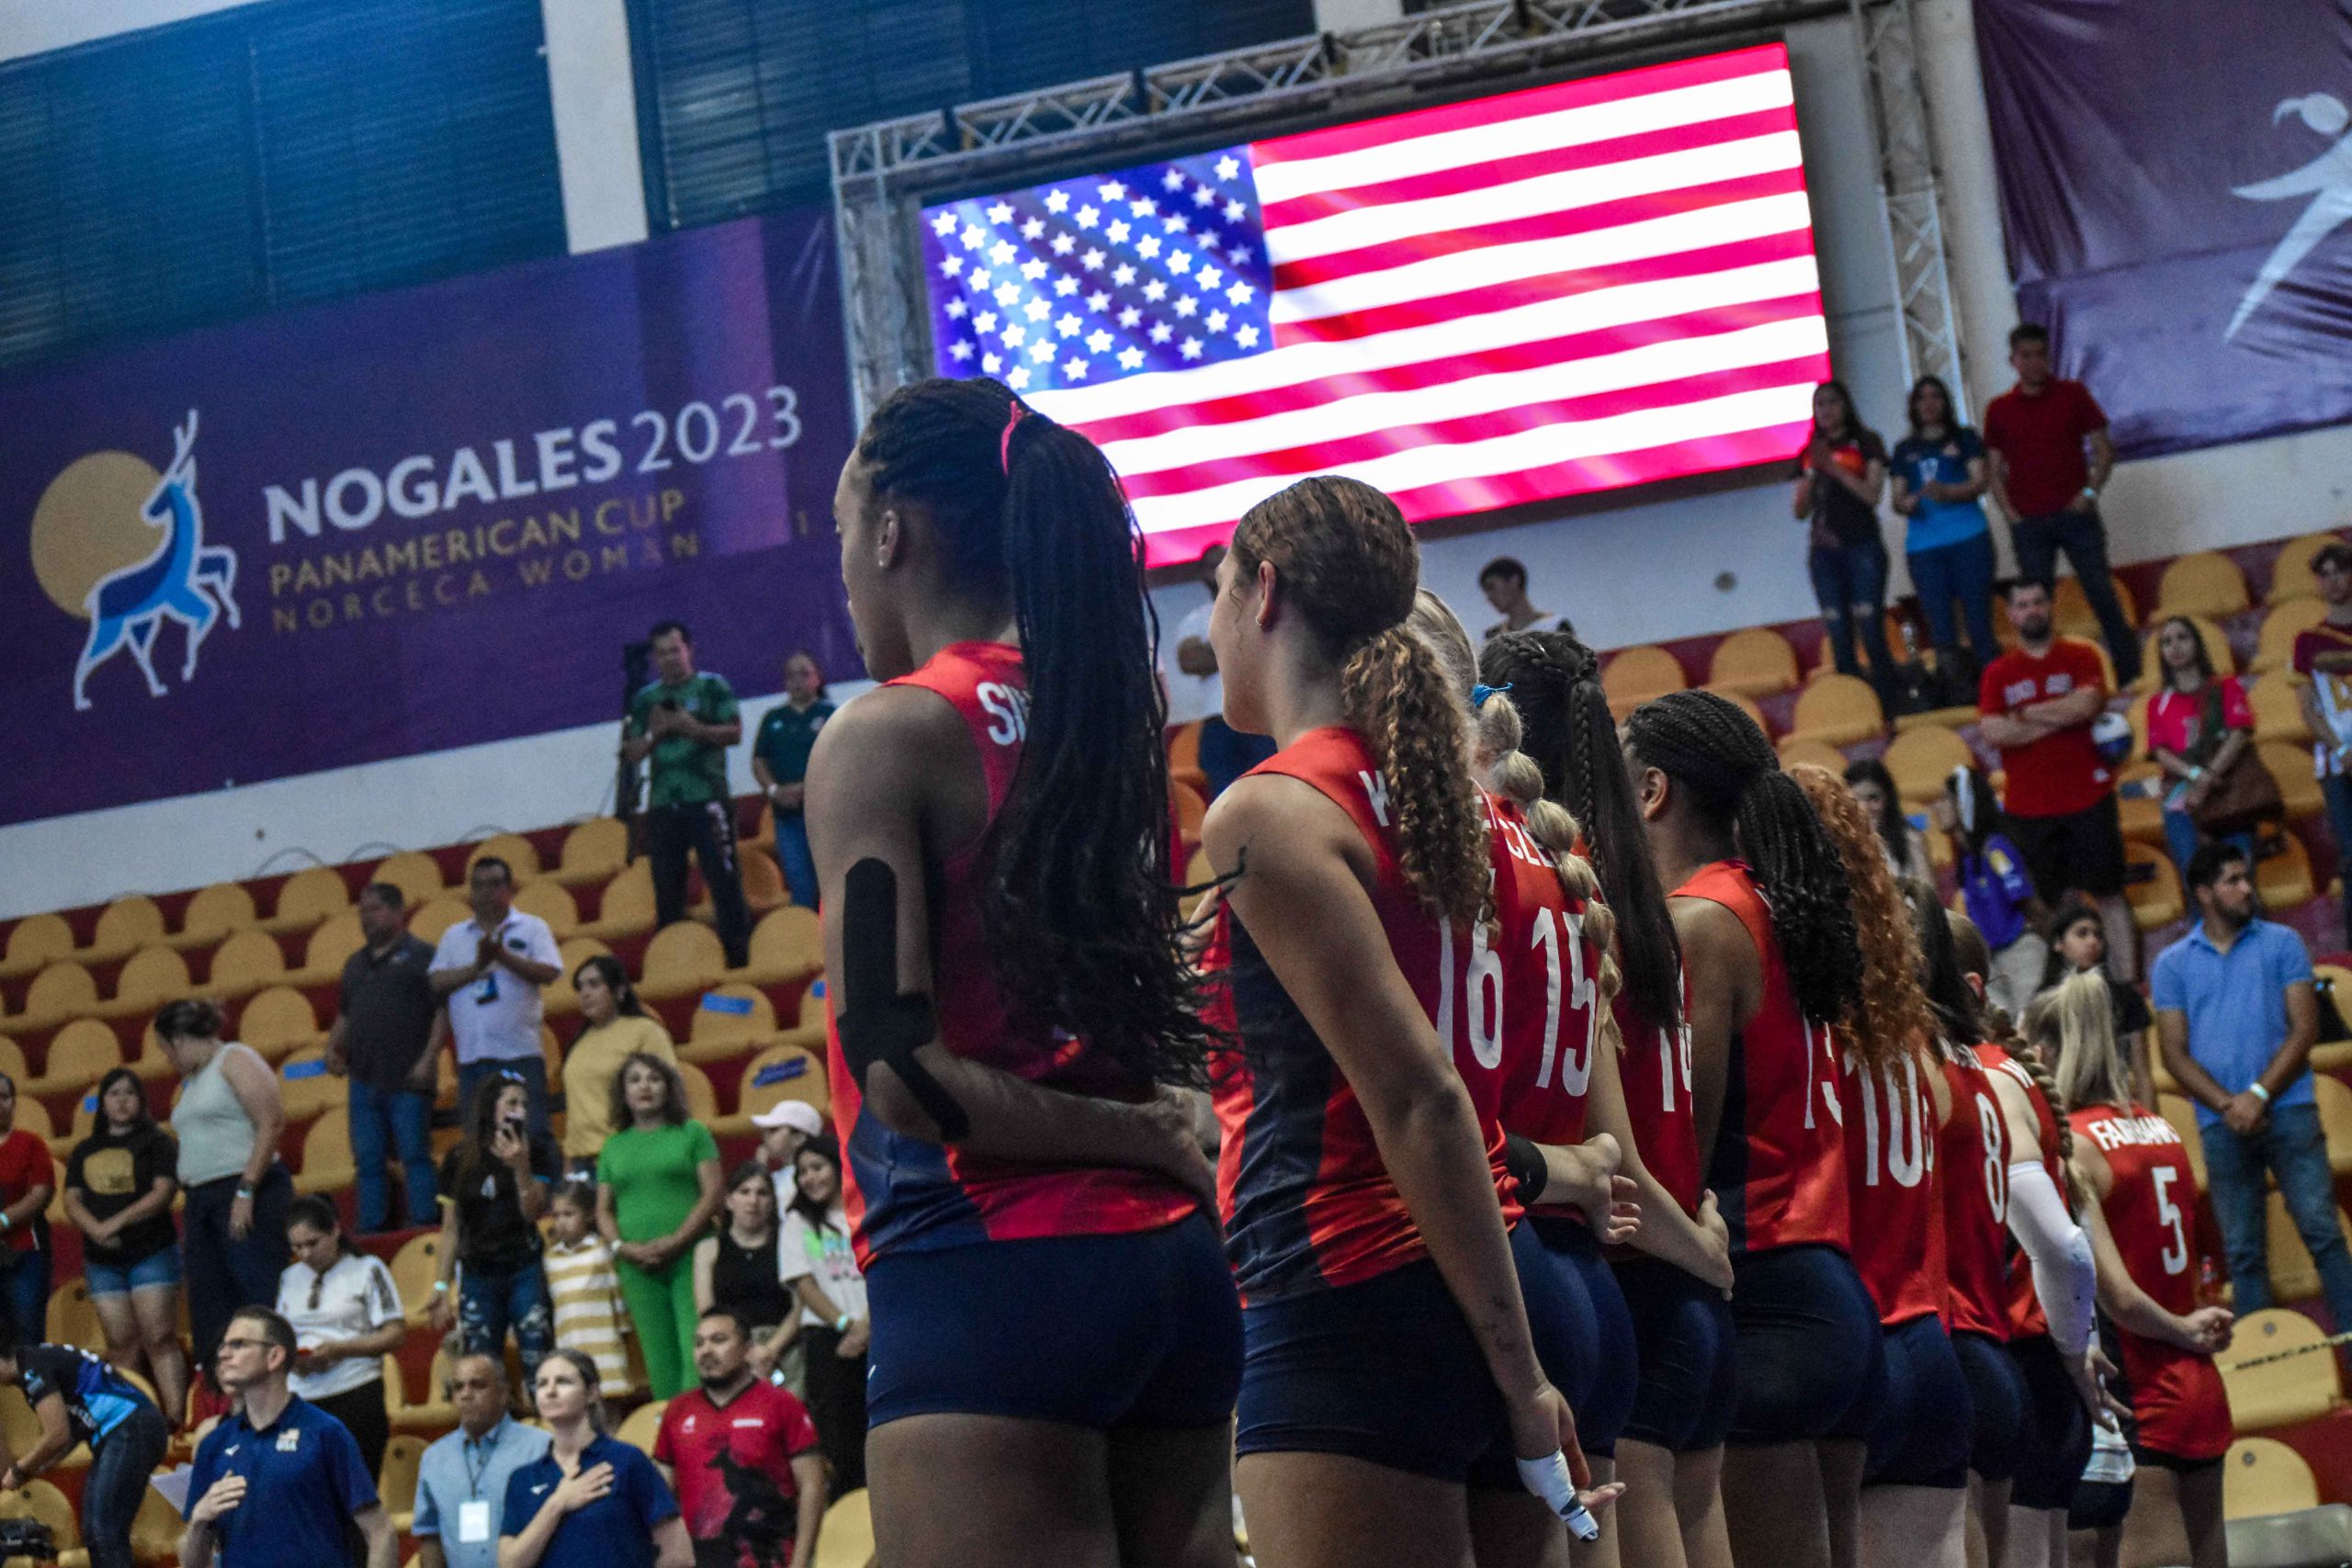 USA beats Cuba in semis and is headed to the gold medal match